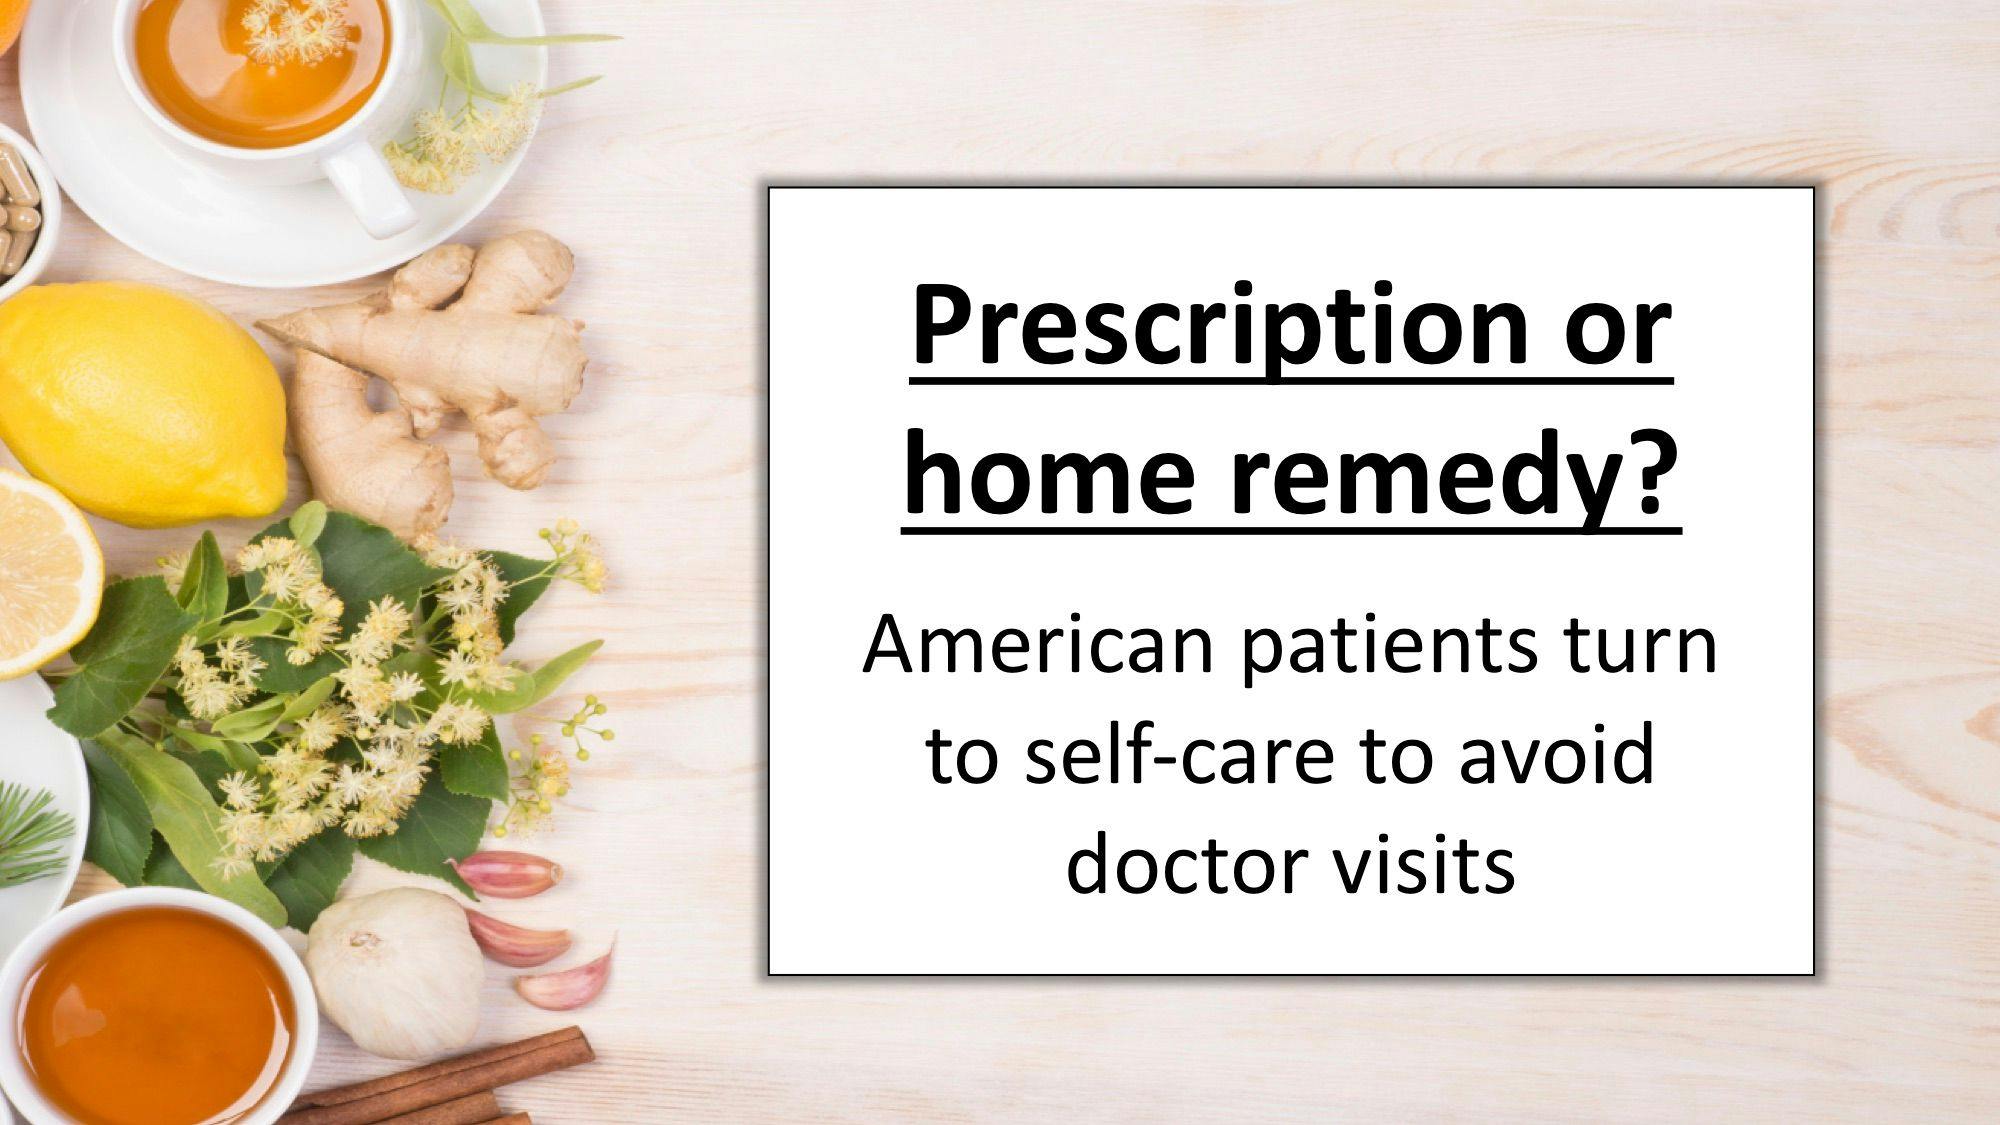 Prescription or home remedy? American patients turn to self-care to avoid doctor visits